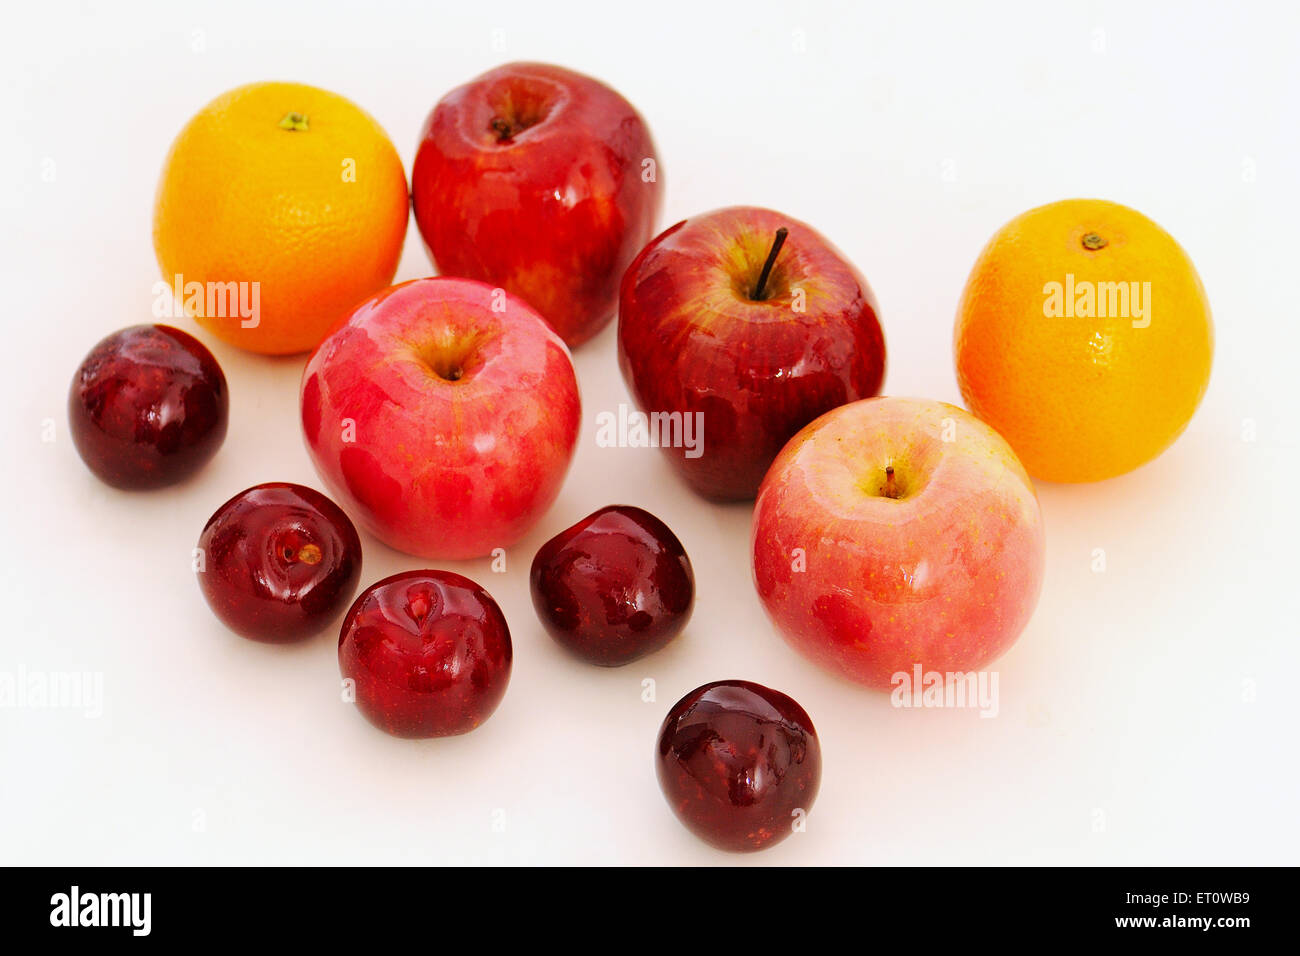 apples oranges plums on white background Stock Photo